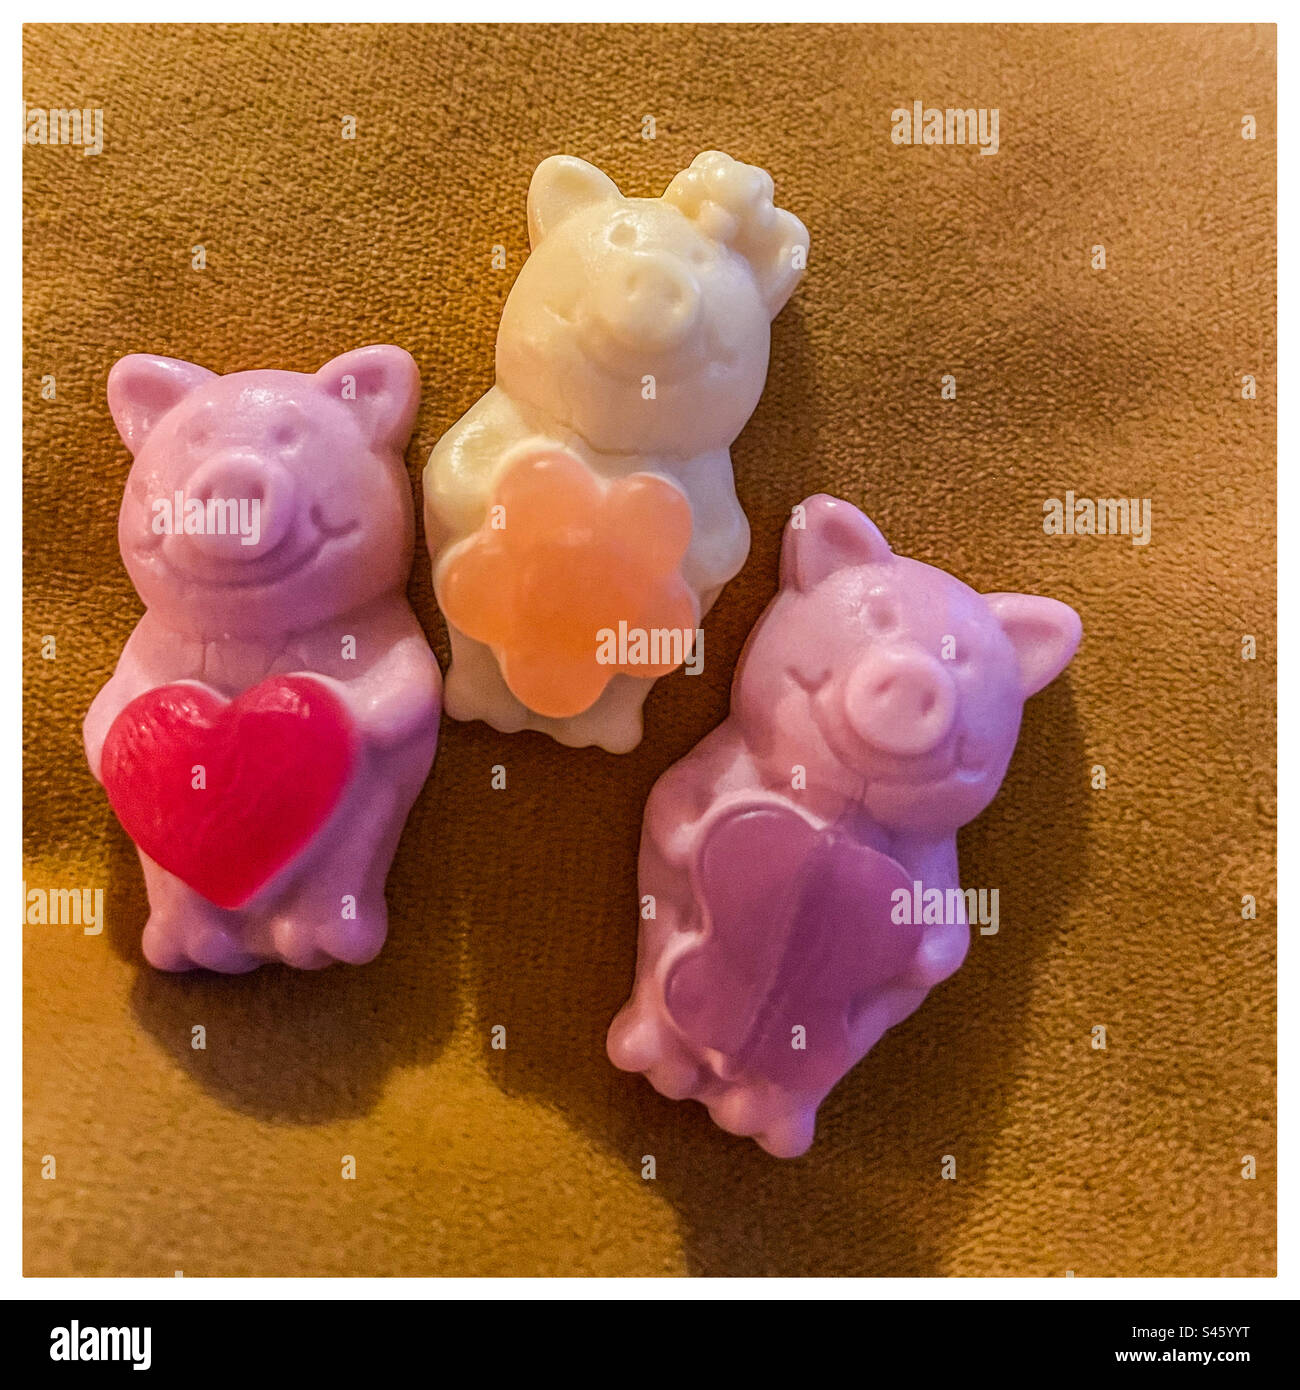 Percy pig sweets Stock Photo